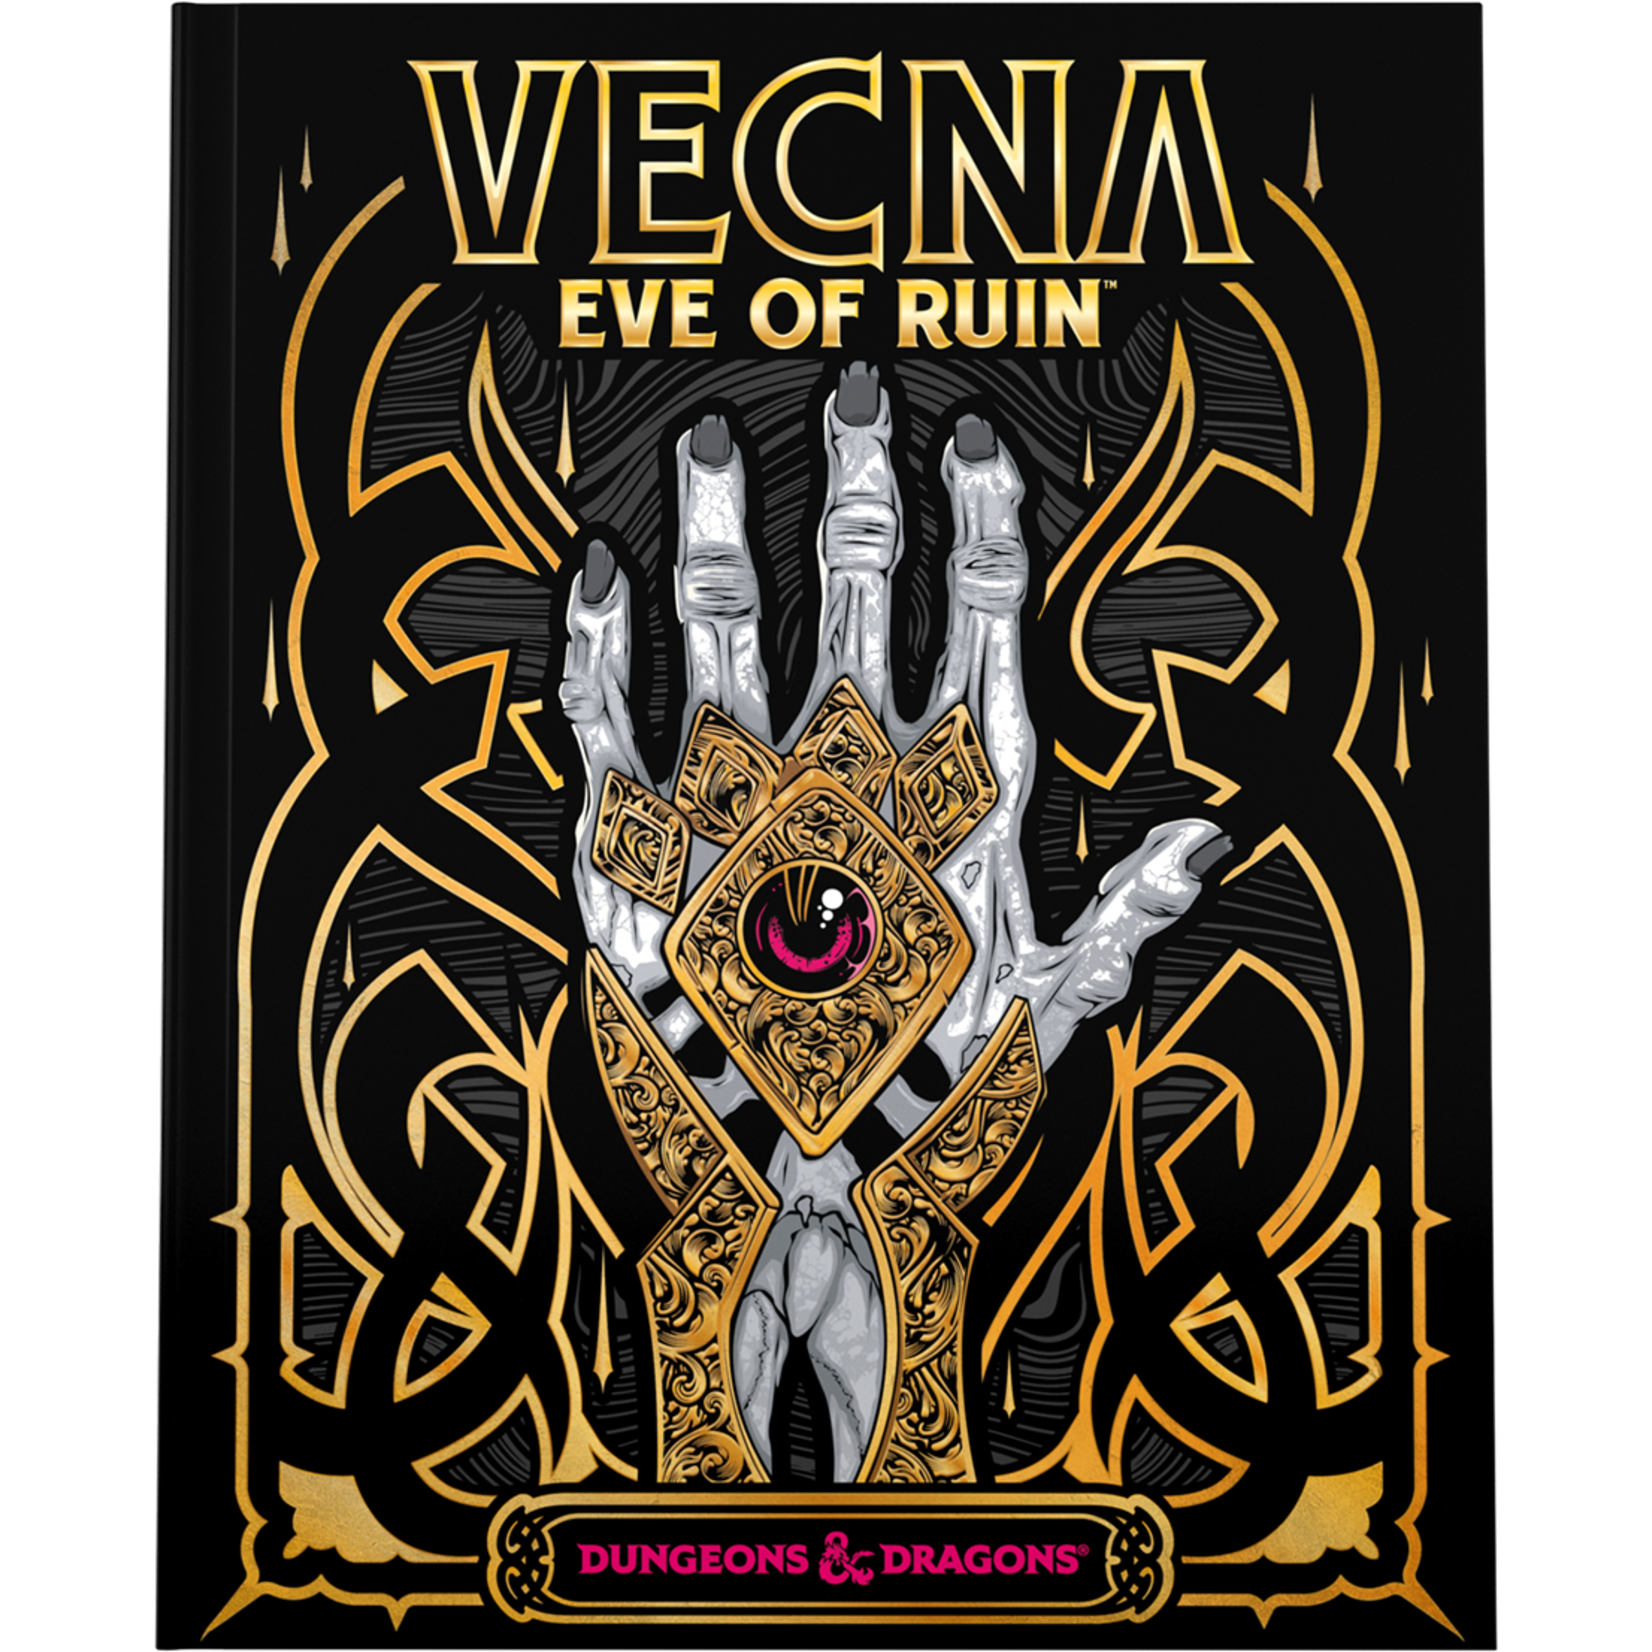 Dungeons & Dragons Dungeons & Dragons – Vecna: Eve of Ruin  (5th Edition, Alternate Cover)